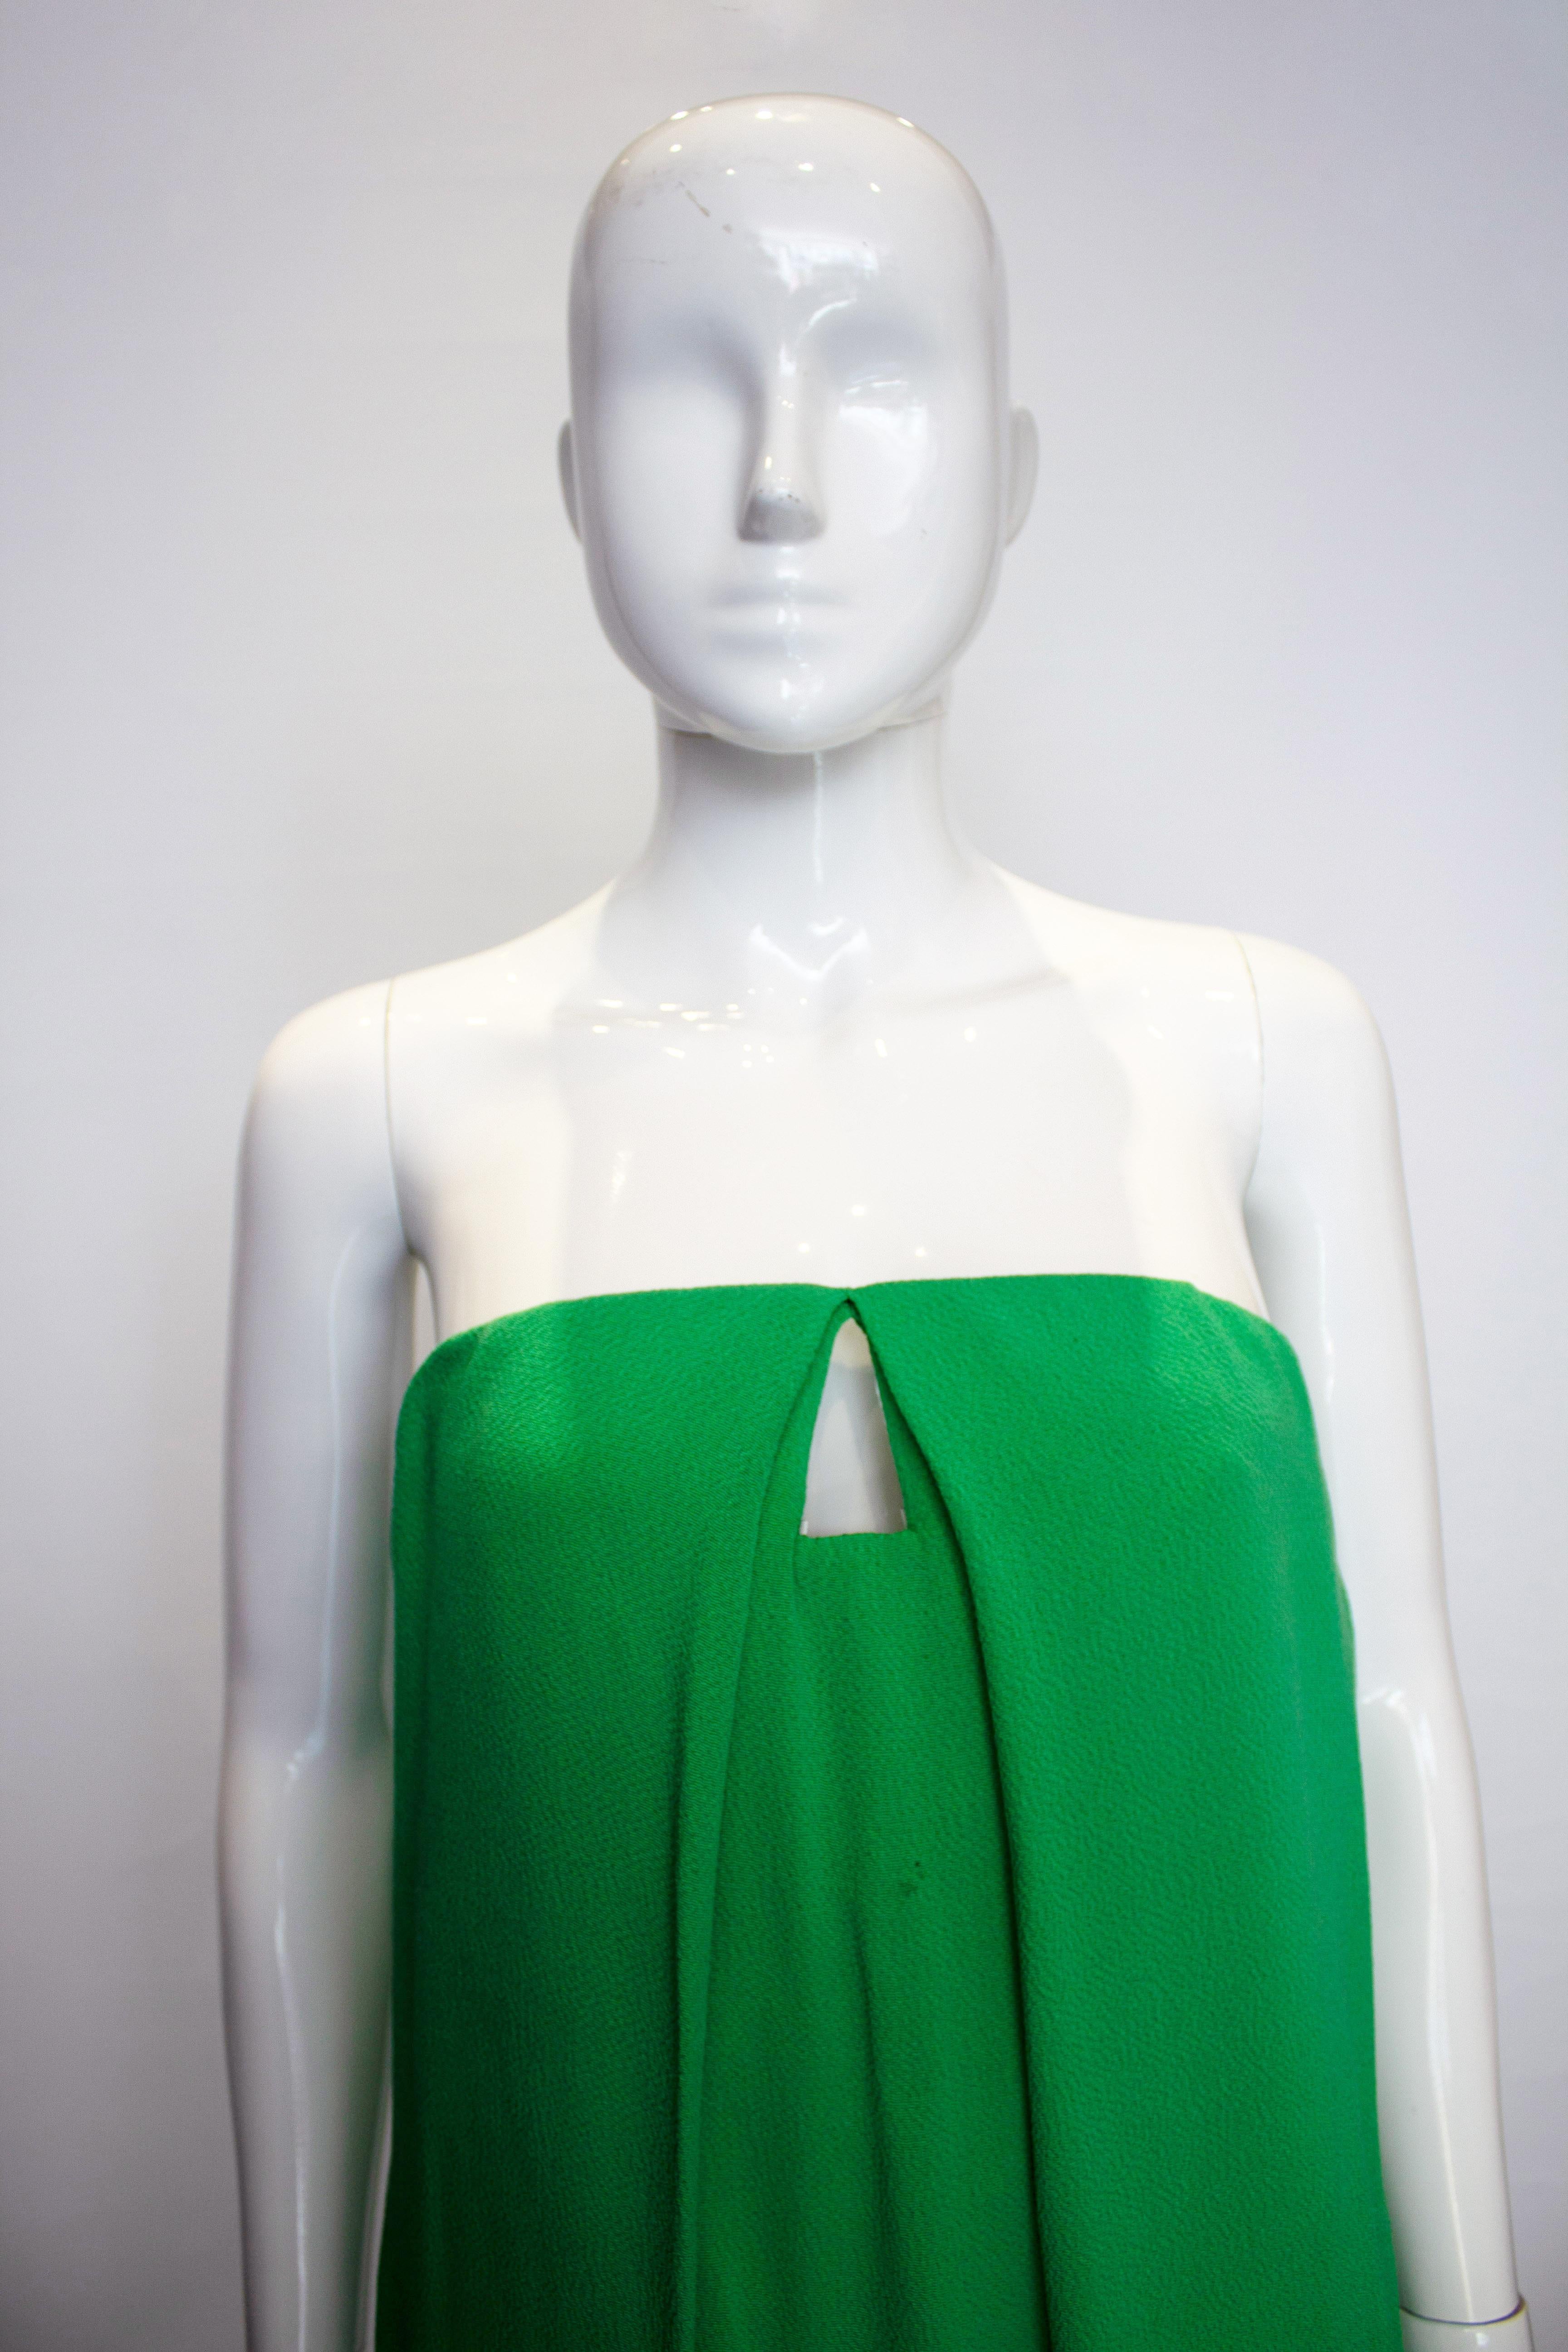 A chic cocktail dress by Bottega Veneta in a pretty green colour. The dress is strapless with internal boning and bra cups. It has a side zip opening, is fully lined and has one pocket.